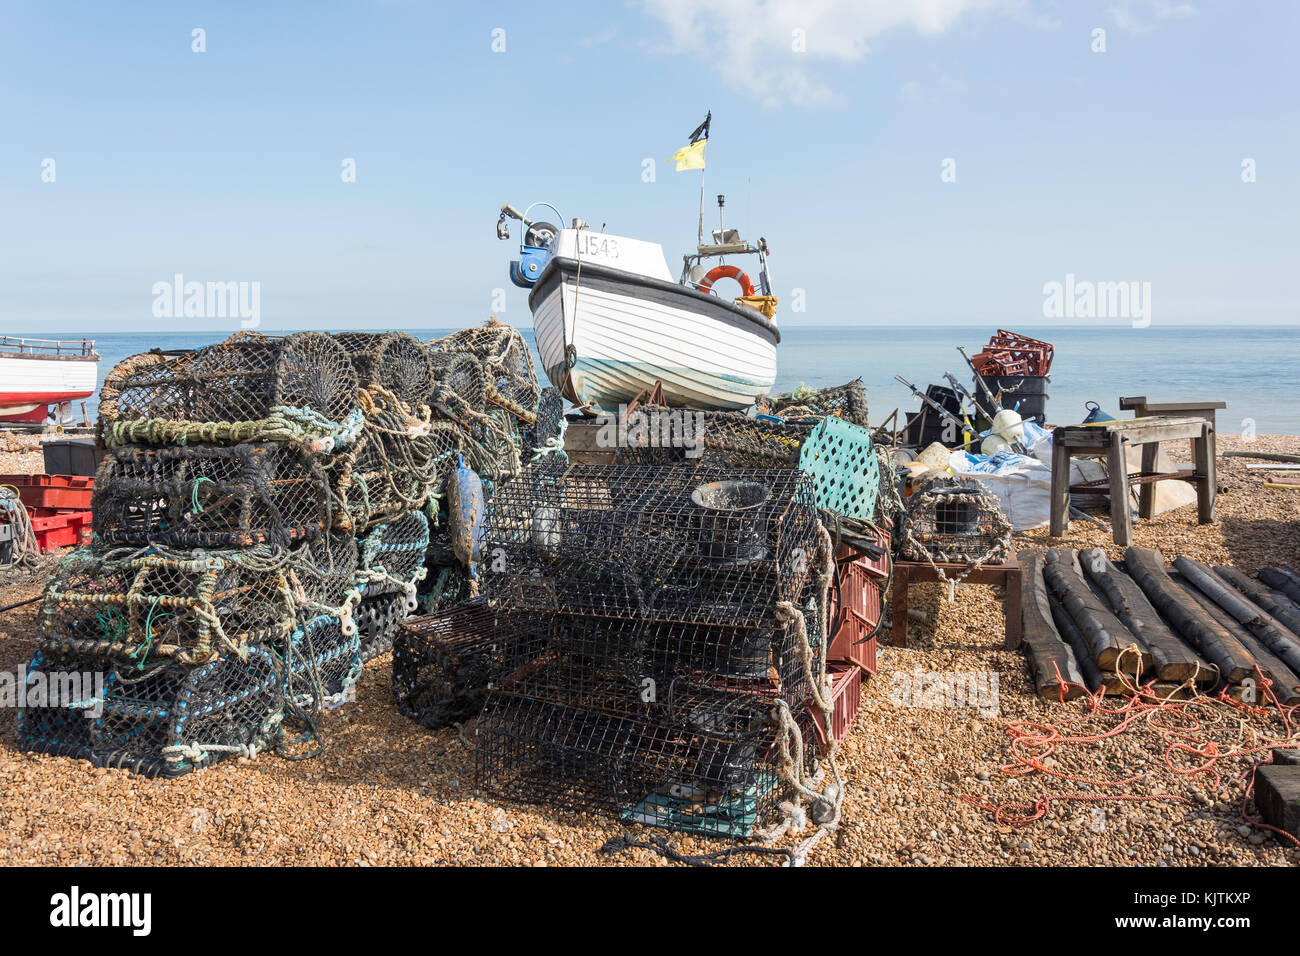 Lobster pots and fishing boat on beach, Deal, Kent, England, United Kingdom Stock Photo